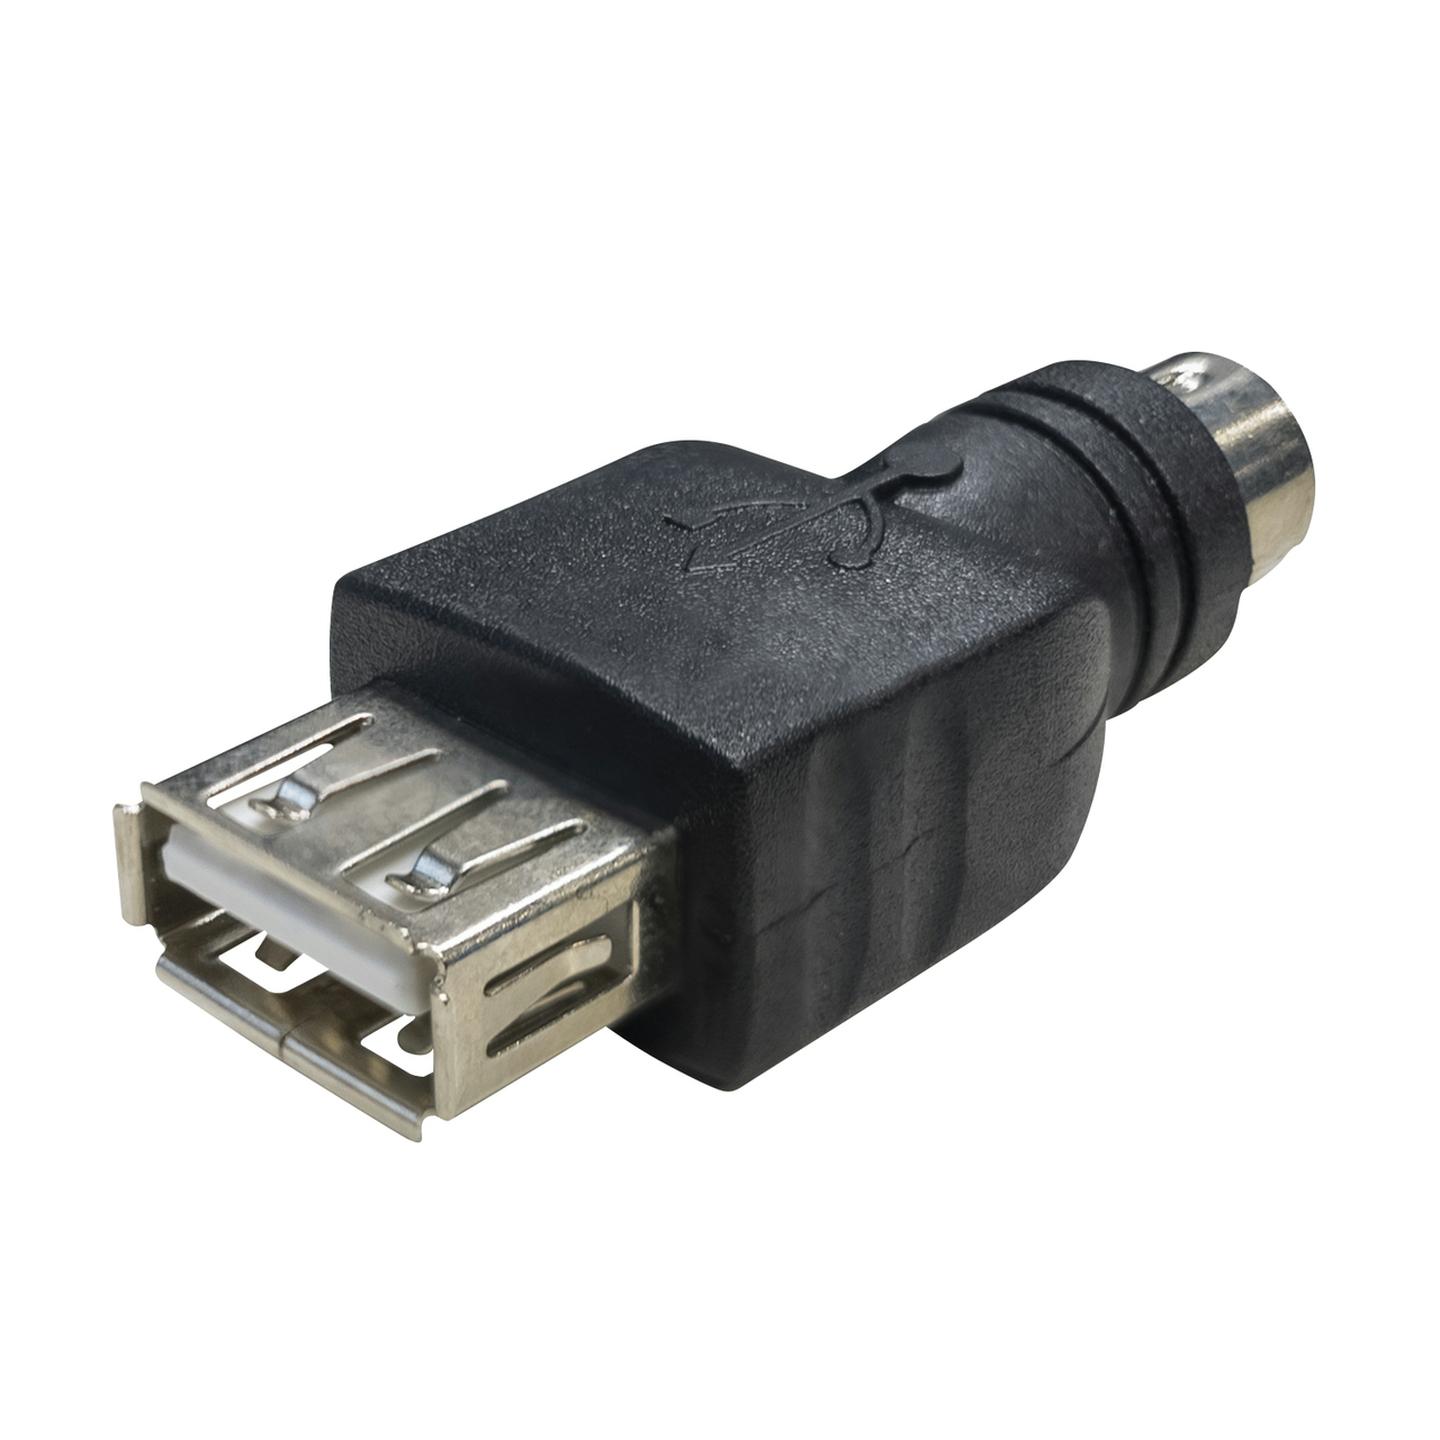 USB to PS2 Adaptor - USB-A Female to PS/2 Male